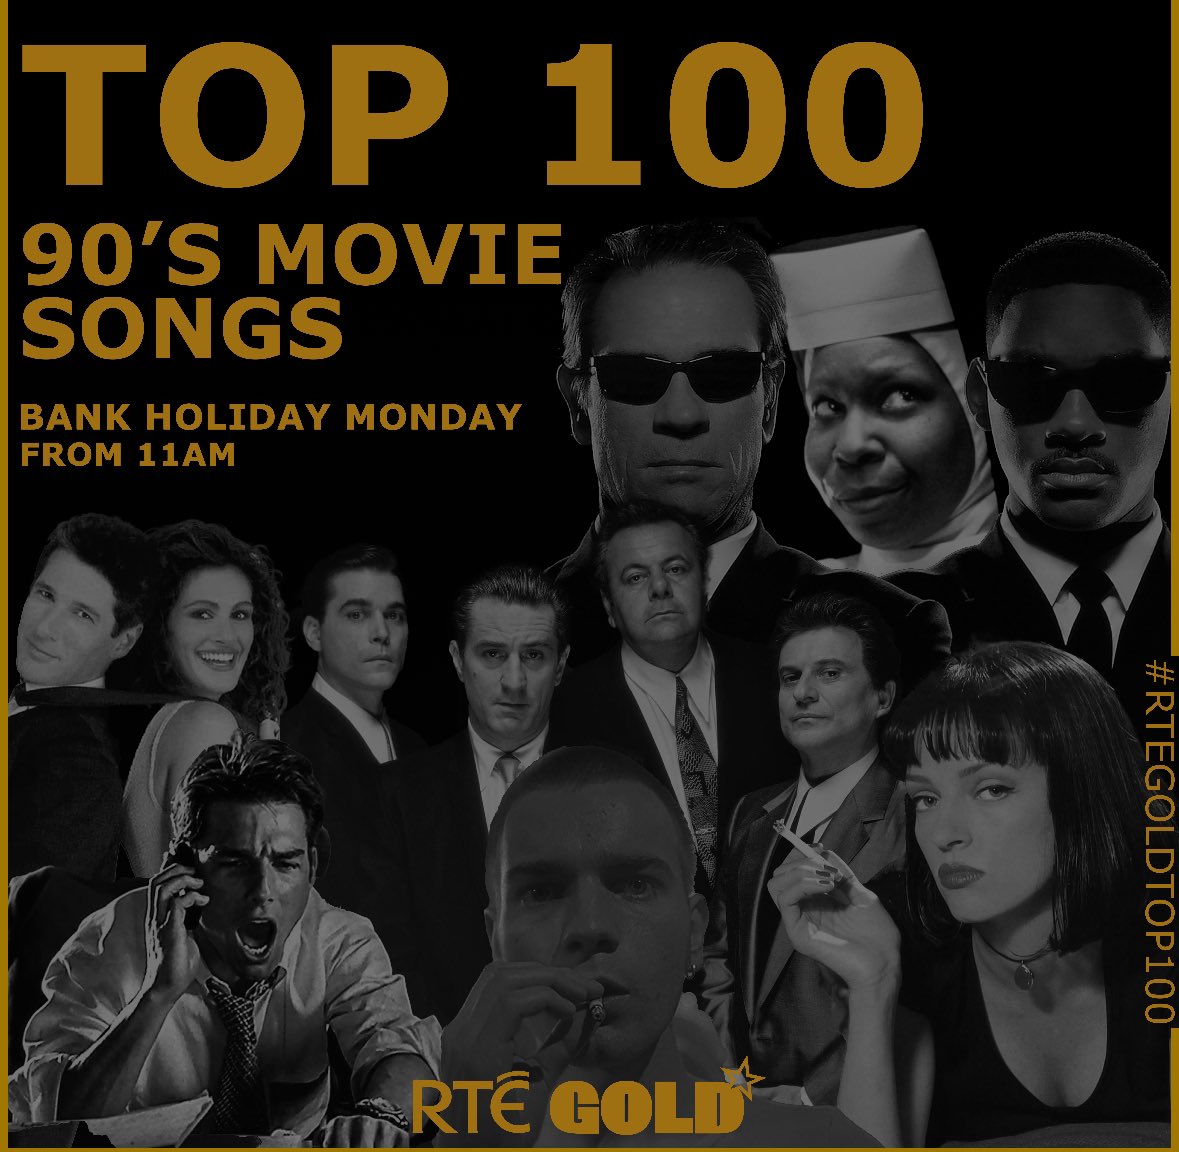 This Bank Holiday Monday Enjoy a kiss from a rose.. Top 100 90s Movie Songs #RTEGoldTop100